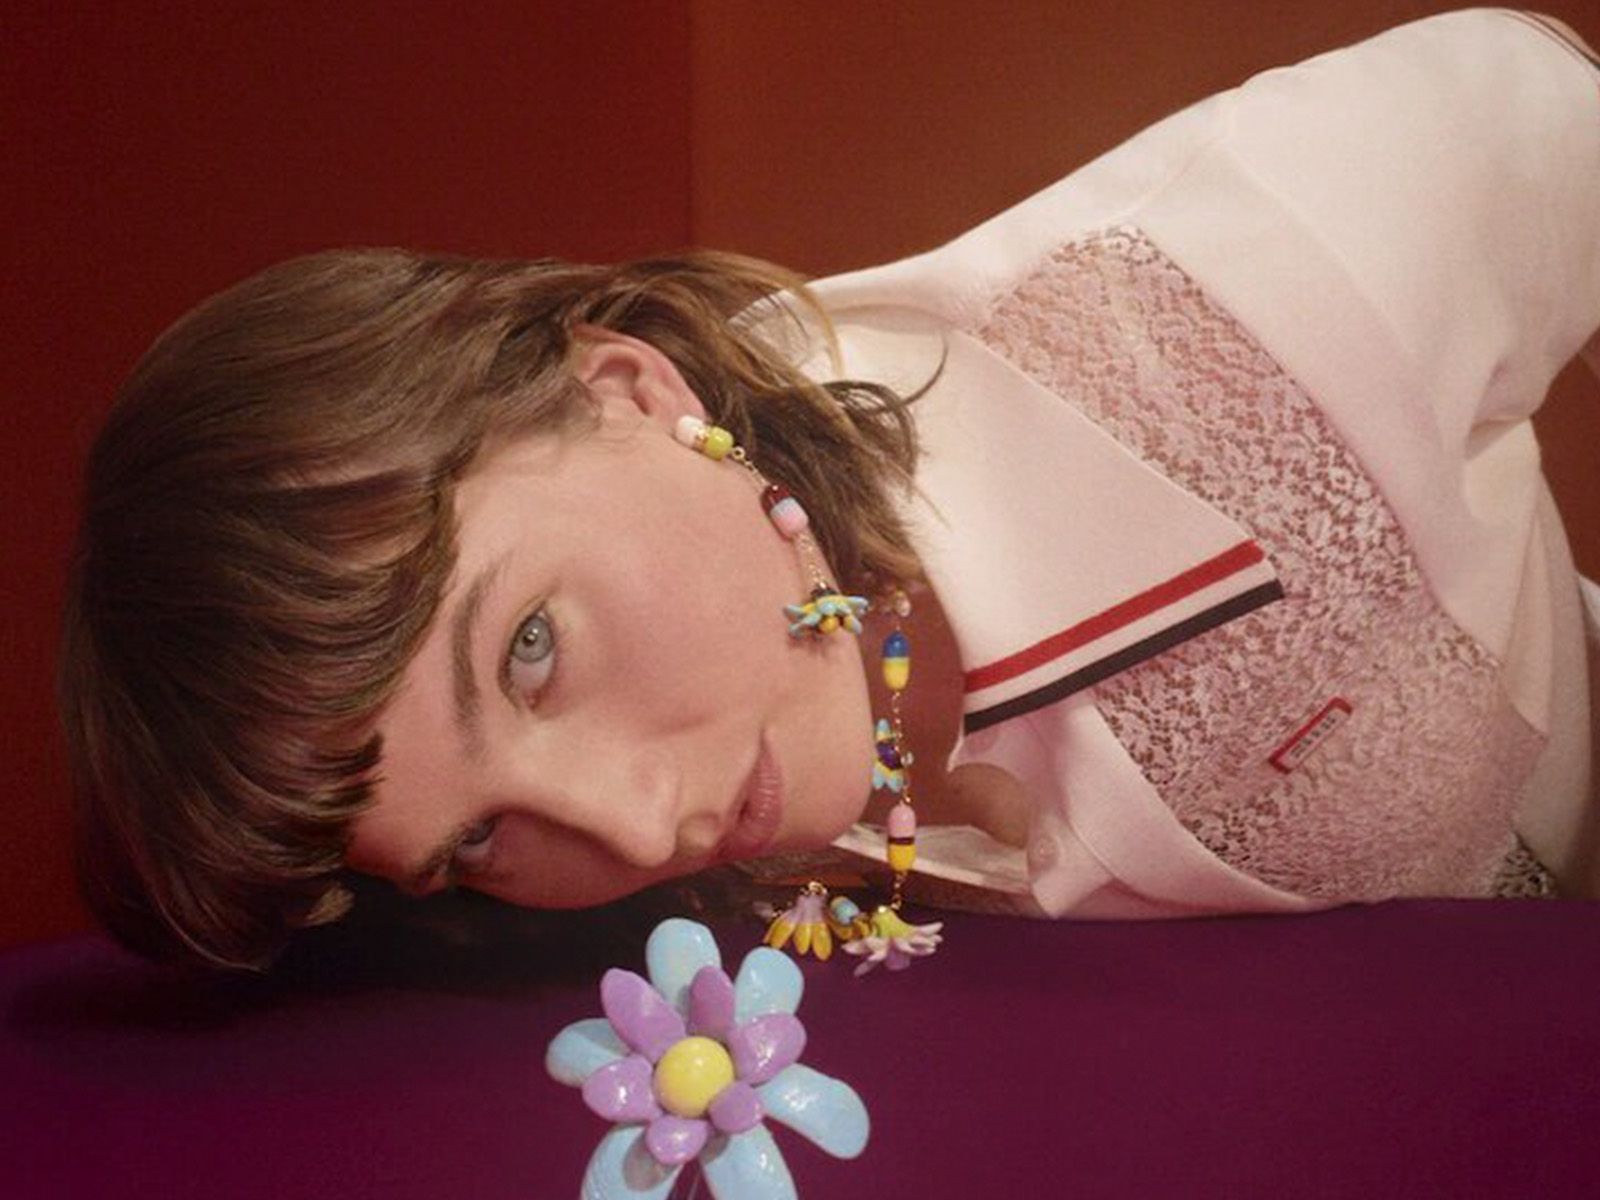 Miu Miu unveils new jewelry collection in collaboration with artists Nathalie Djurberg and Hans Berg